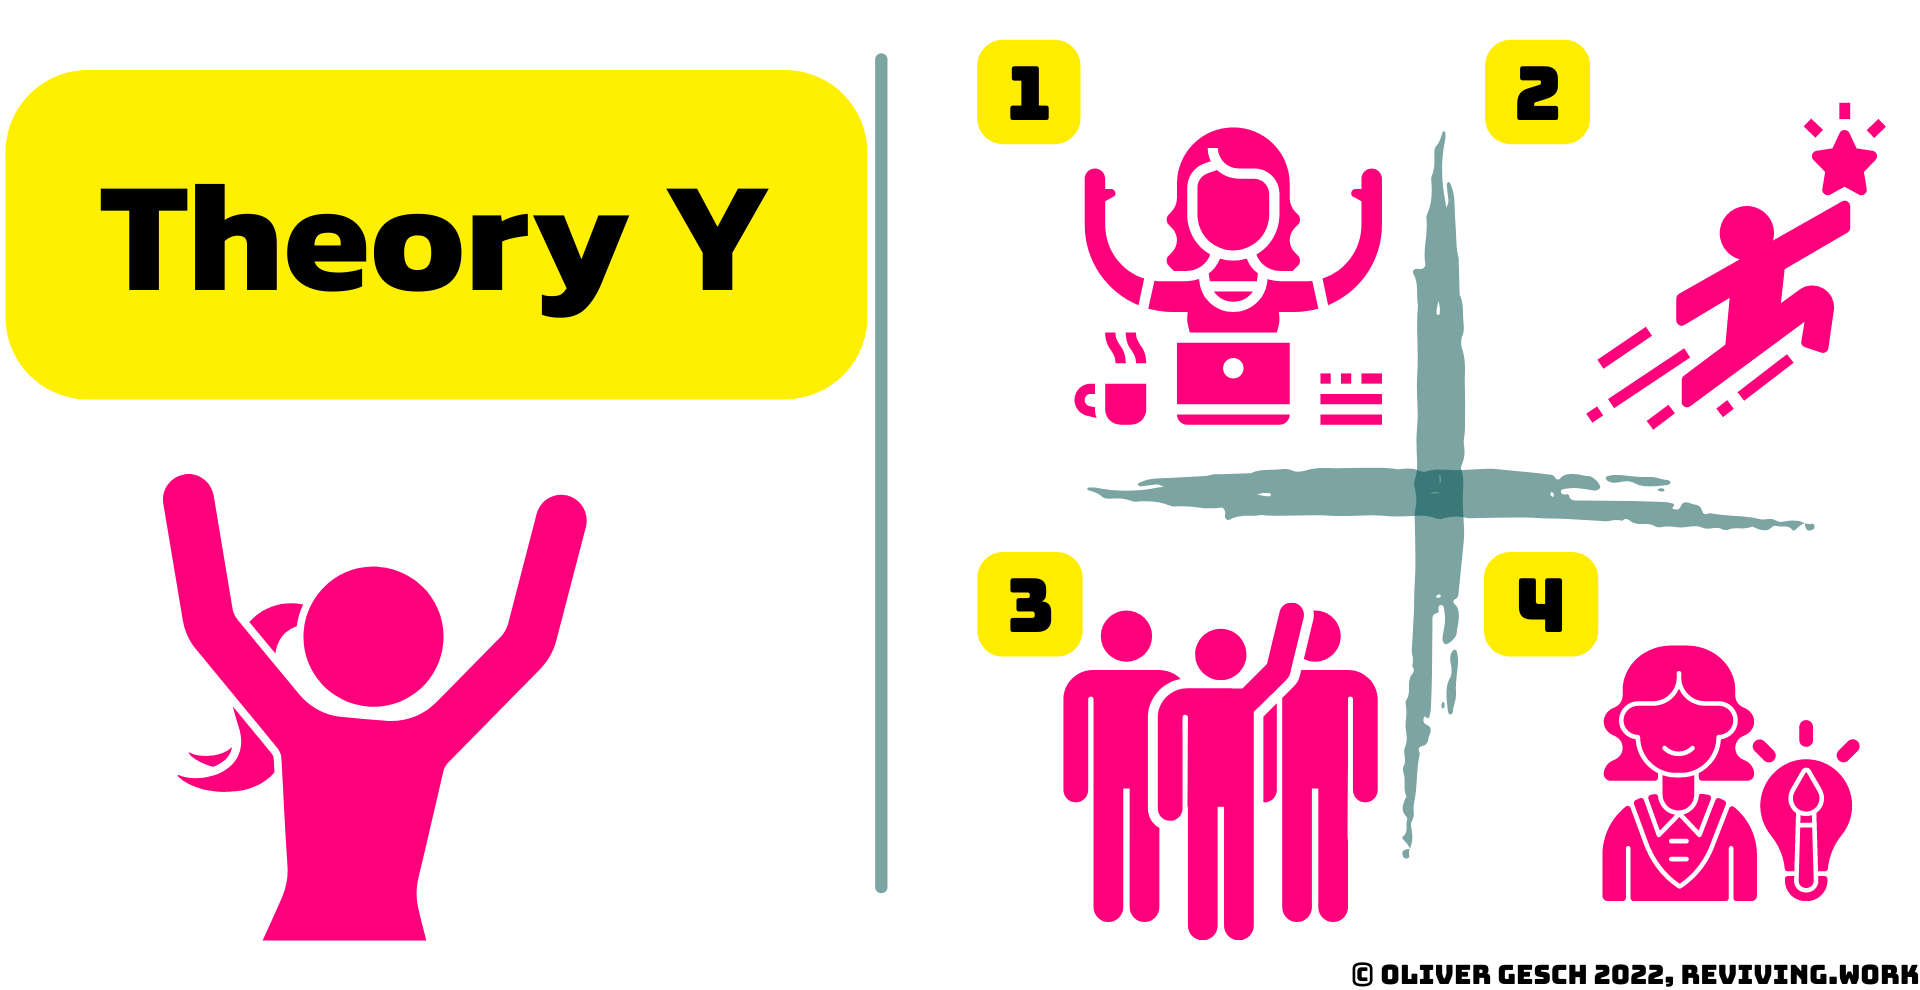 Theory Y is visualized by people raising both arms high in the air. Theory Y meaning is shown by person happy to work, person leading him/herself, person asking for responsibility, and creativity.